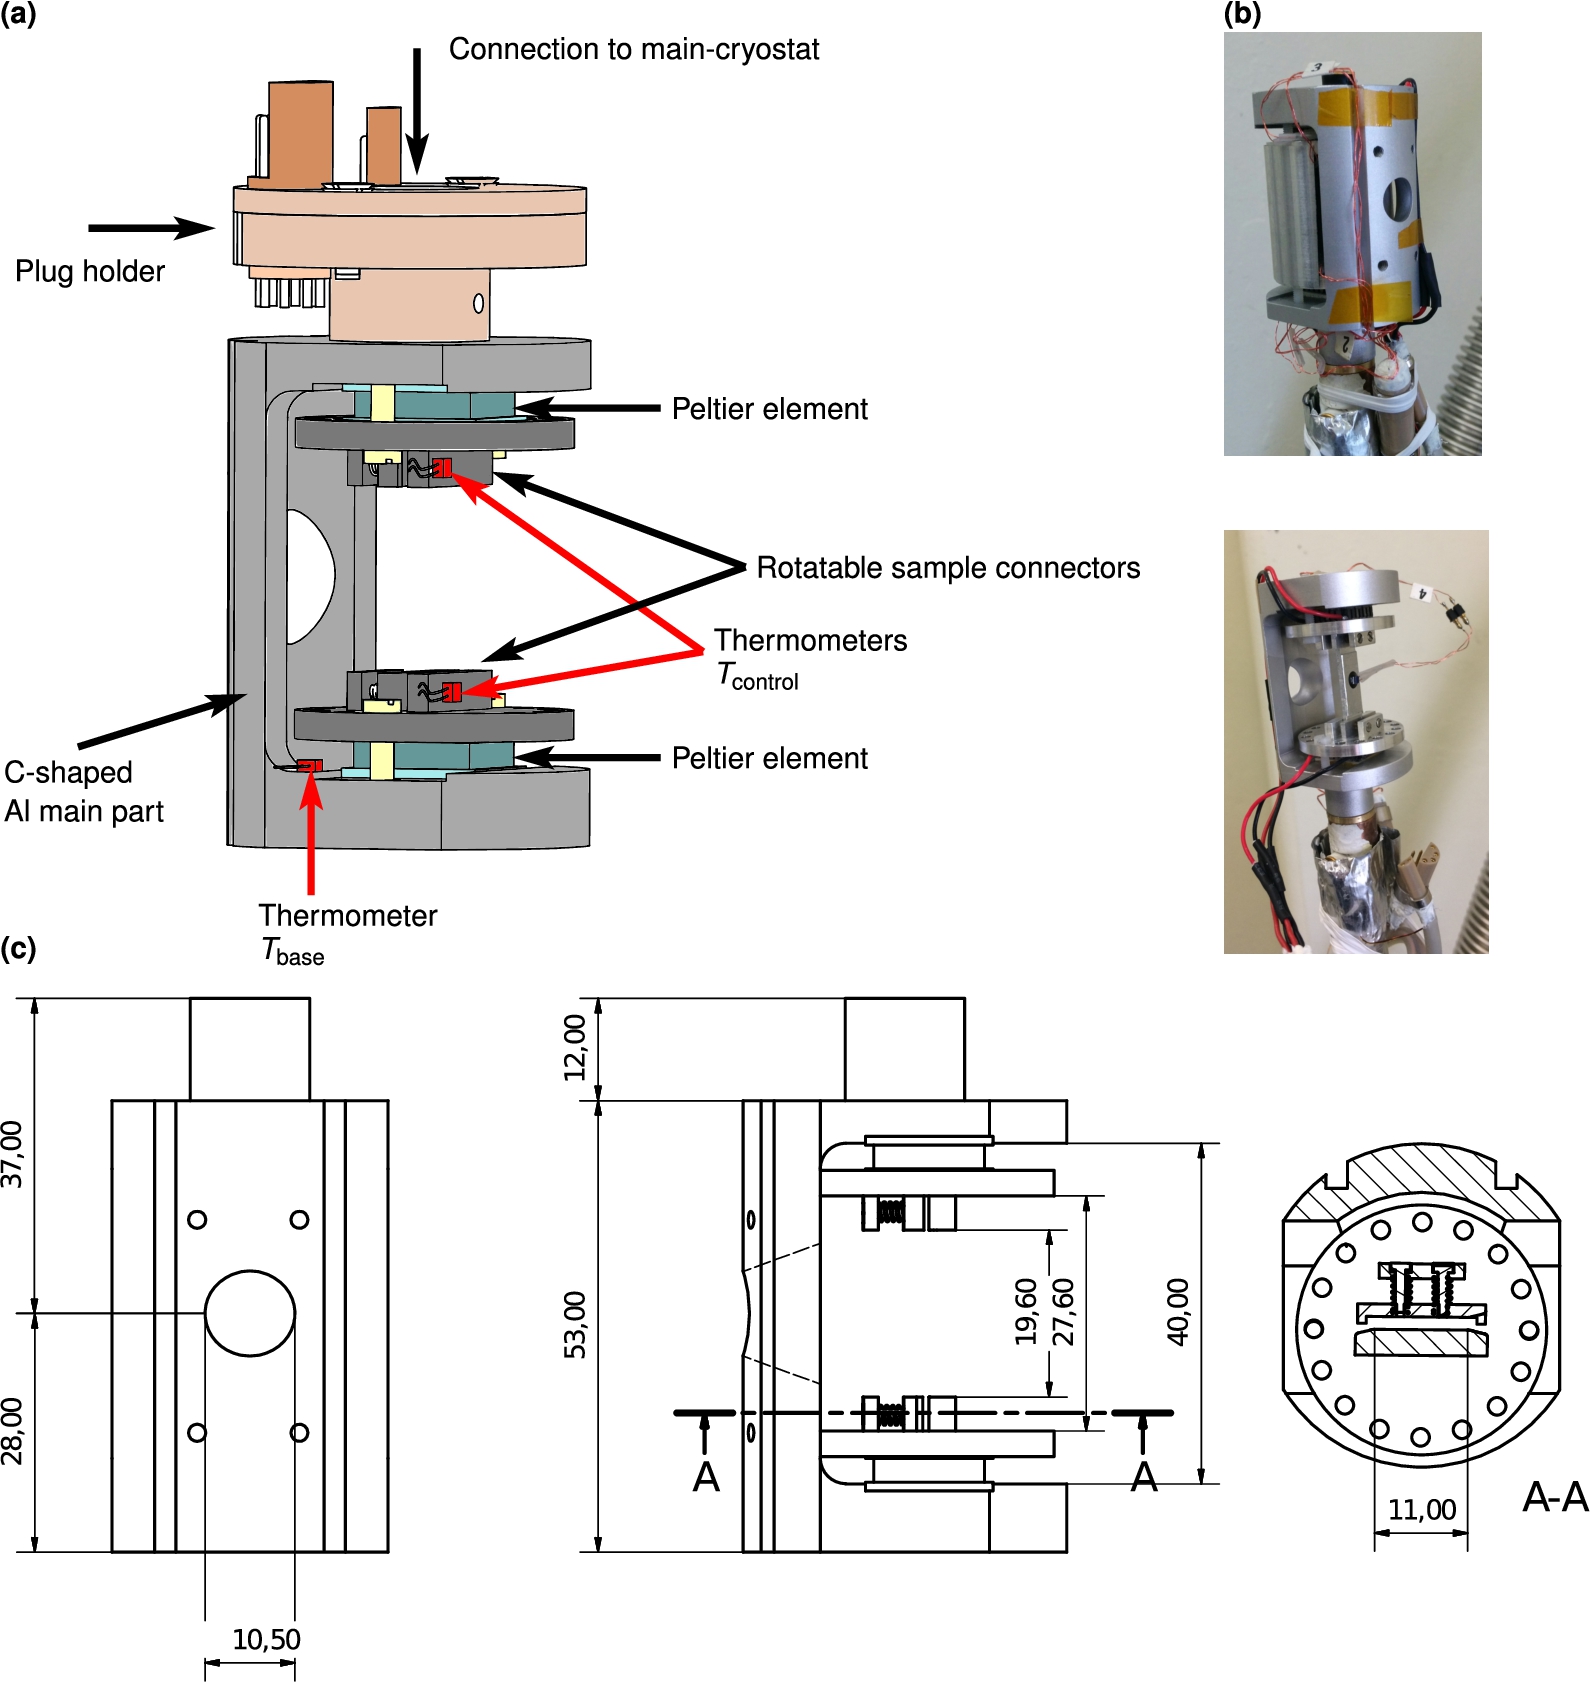 (a) Annotated drawing of the Huginn sub-cryostat, the different main parts are indicated with different colours. Notice the positions of the three thermometers, two on the sample connectors and one on the C-shaped main mechanical part of the sub-cryostat. The former (Tcontrol) are used for the individual PID control loops of the Peltier elements, and the latter for monitoring the base temperature (Tbase). The base temperature can differ from the main cryostat temperature due to heating or cooling from the Peltier elements, and the thermal impedance to the main cryostat. The maximum temperature difference that the Peltier elements can sustain is defined with respect to this base temperature. (b) Photos of the final Huginn sub-cryostat mounted on the ESS CCR cryostat. The sub-cryostat with and without heat-radiation shields is shown. A dummy sample consisting of an aluminium plate with a thermometer located at the centre is seen mounted in the sub-cryostat. These types of dummy samples have been used for all the tests of the sub-cryostat and the temperature at the centre of the sample is designated Tsample in the later figures. (c) Technical drawings of the Huginn sub-cryostat, all measurements in mm. (Left) C-shaped Al main part of the sub-cryostat seen from the side normally facing the neutron beam. The hole for the neutron beam is seen together with four threaded holes for attaching a neutron absorbing mask to minimise background scattering. (Centre) Sub-cryostat seen from the side, showing Peltier elements and sample connectors. (Right) Details of the rotatable sample connectors which can be orientated in 16 different angles. The sample holder slides into the connector from the side, and is kept in place by a spring-loaded clamping plate.